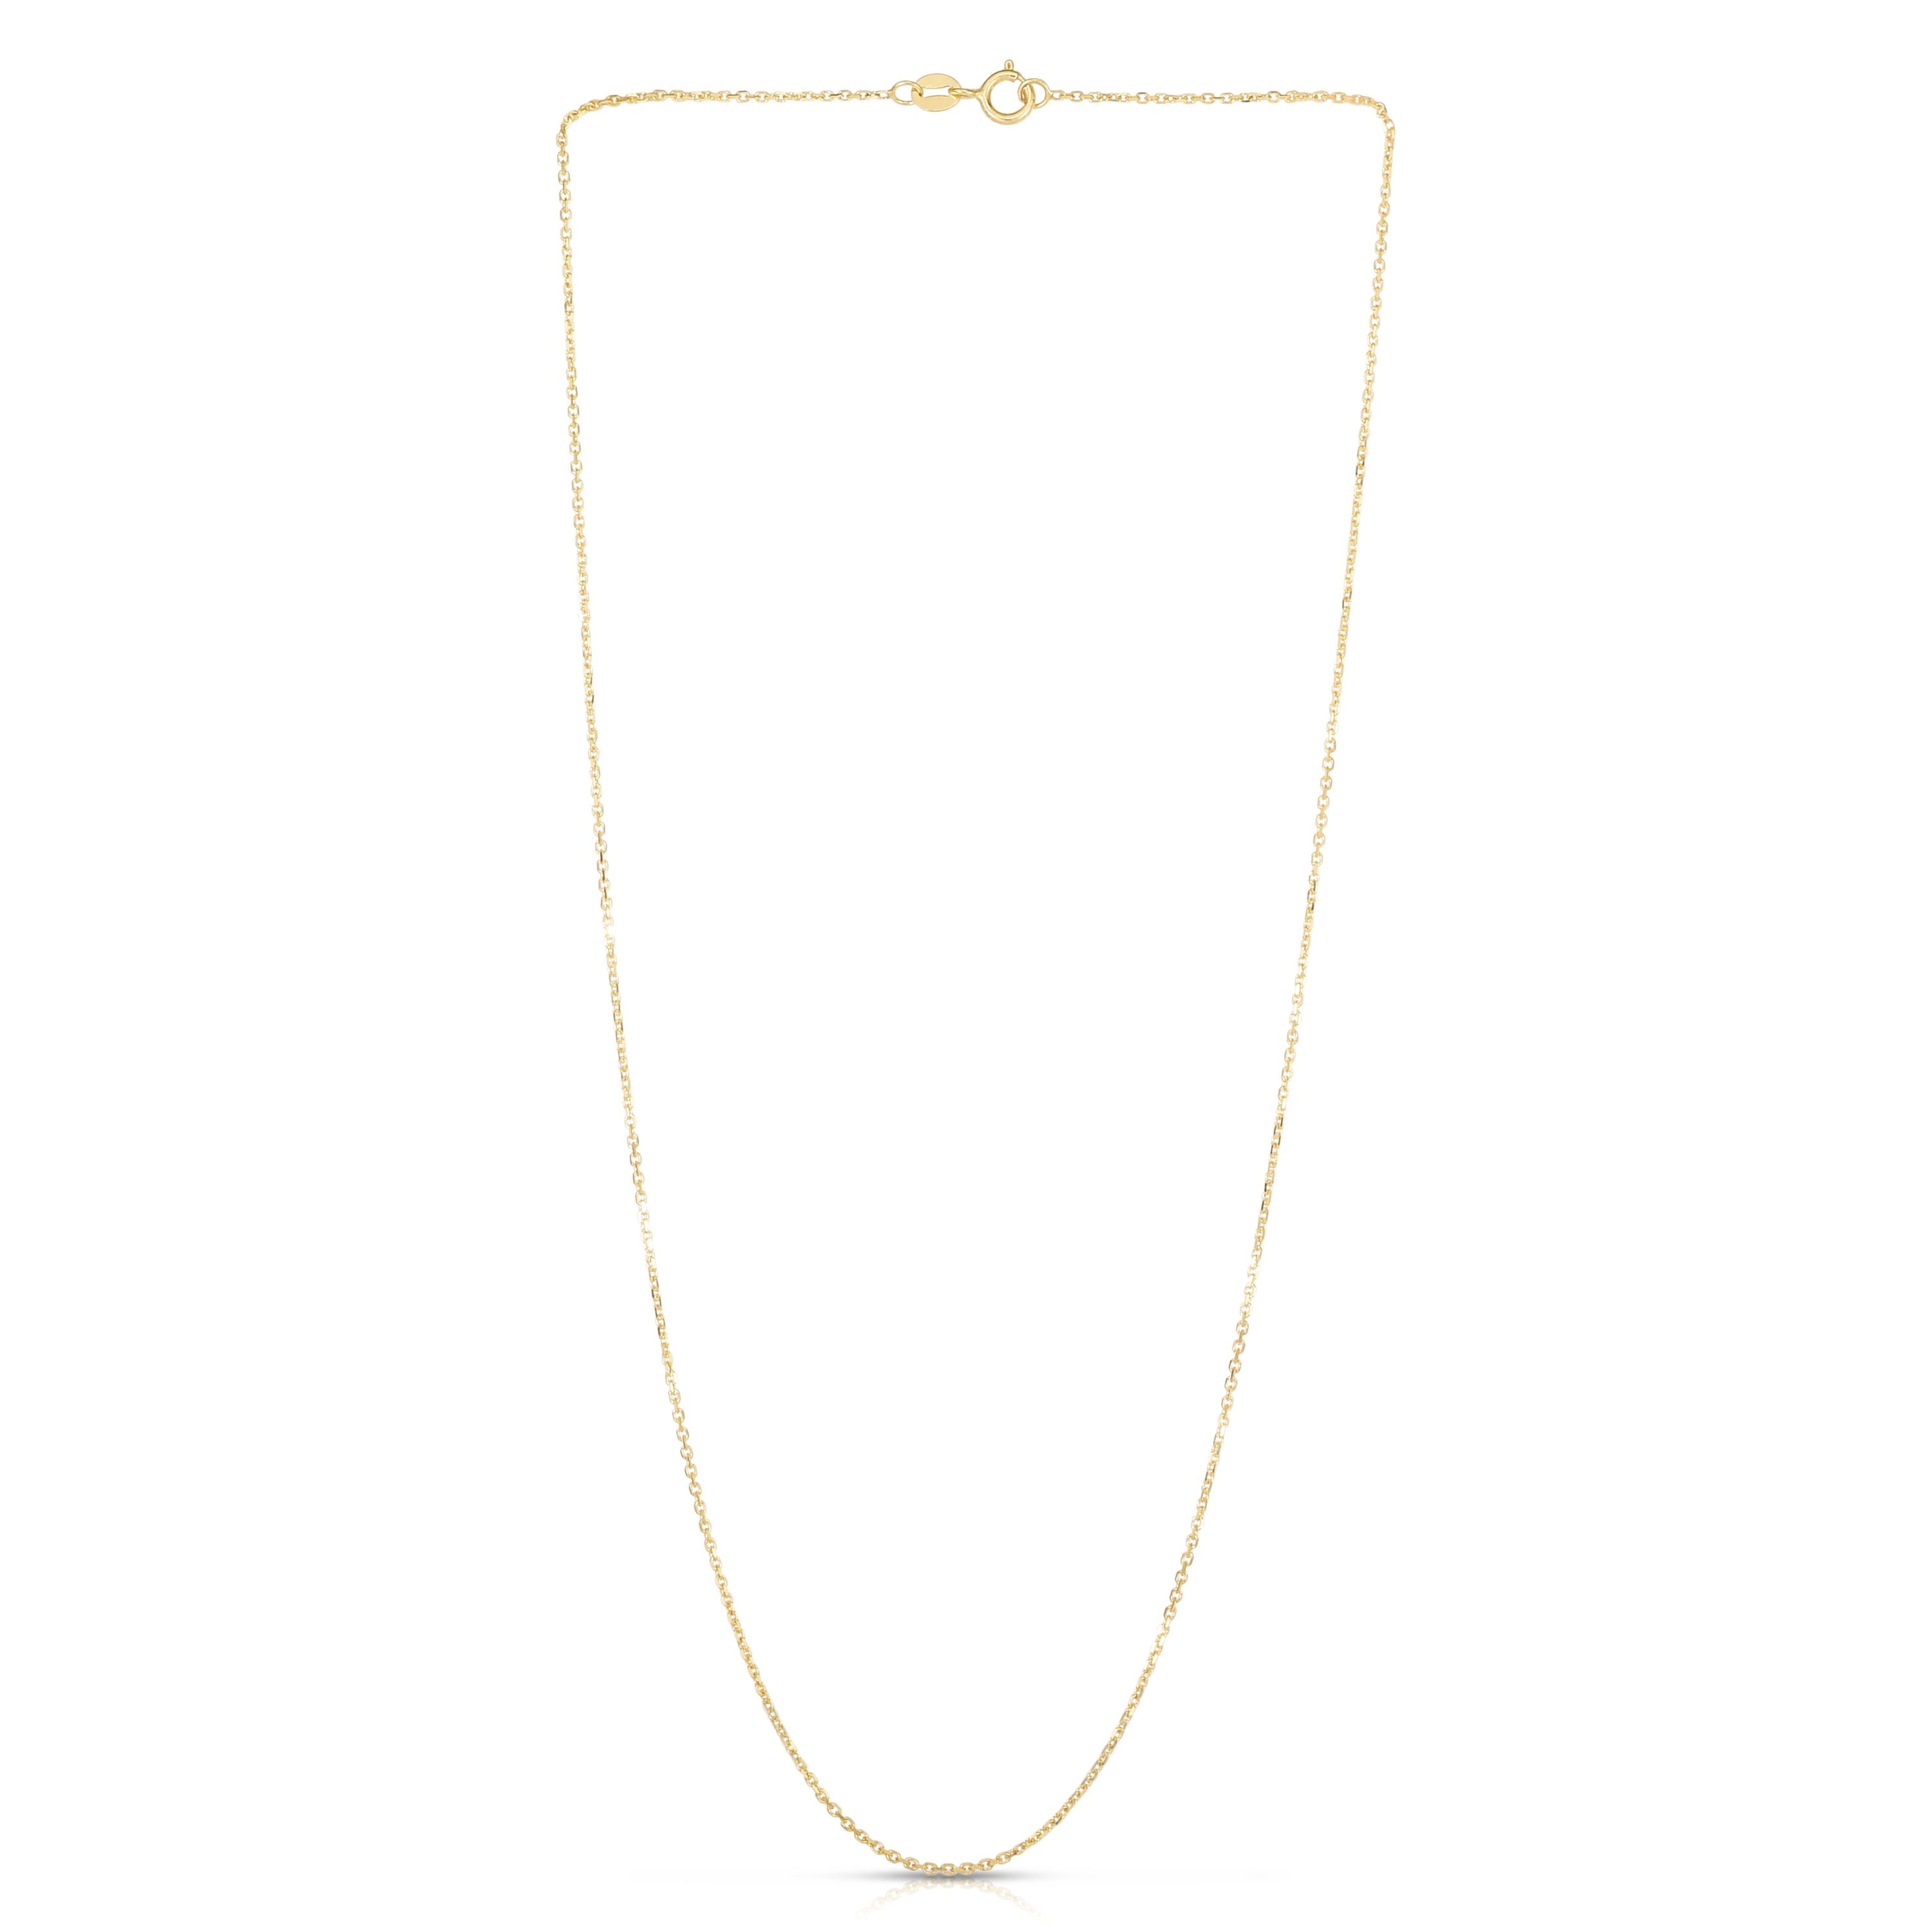 0.90mm 14K YELLOW GOLD Diamond Cut Cable Chain Necklace with Lobster Claw Clasp 